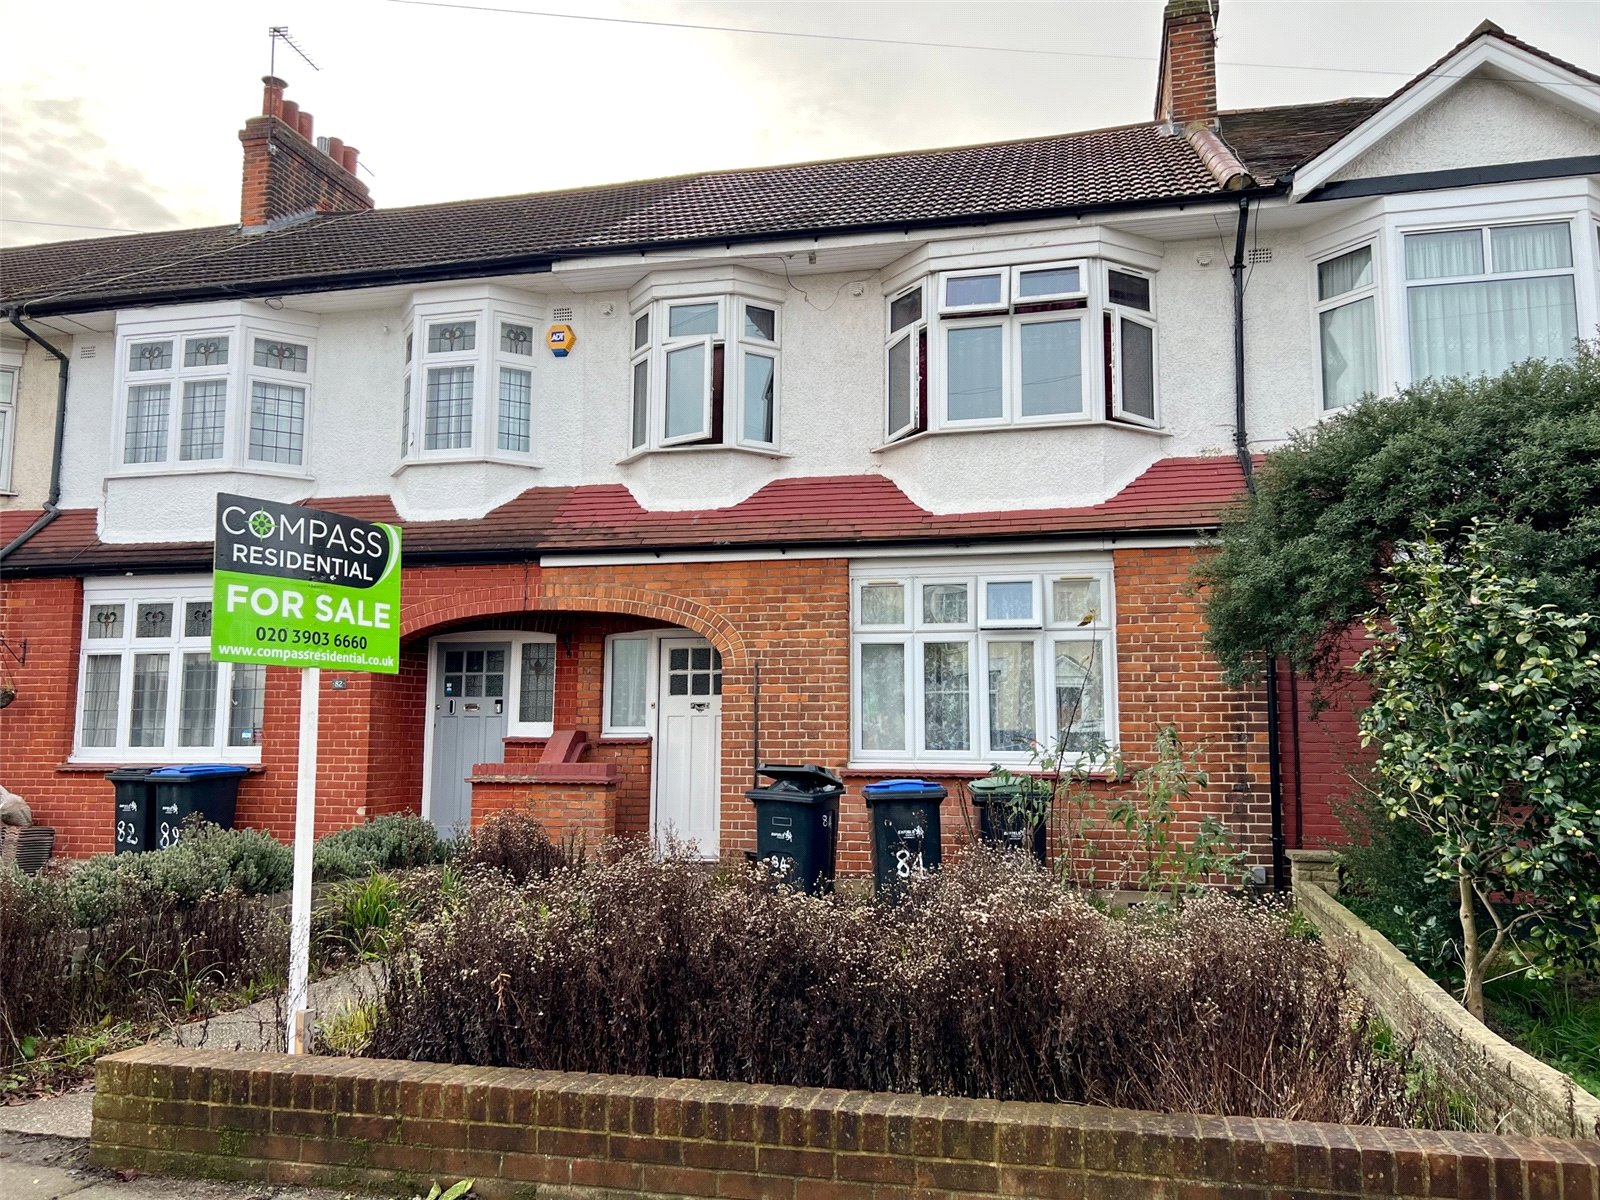 3 bed house for sale in Ridge Road, Winchmore Hill, N21 